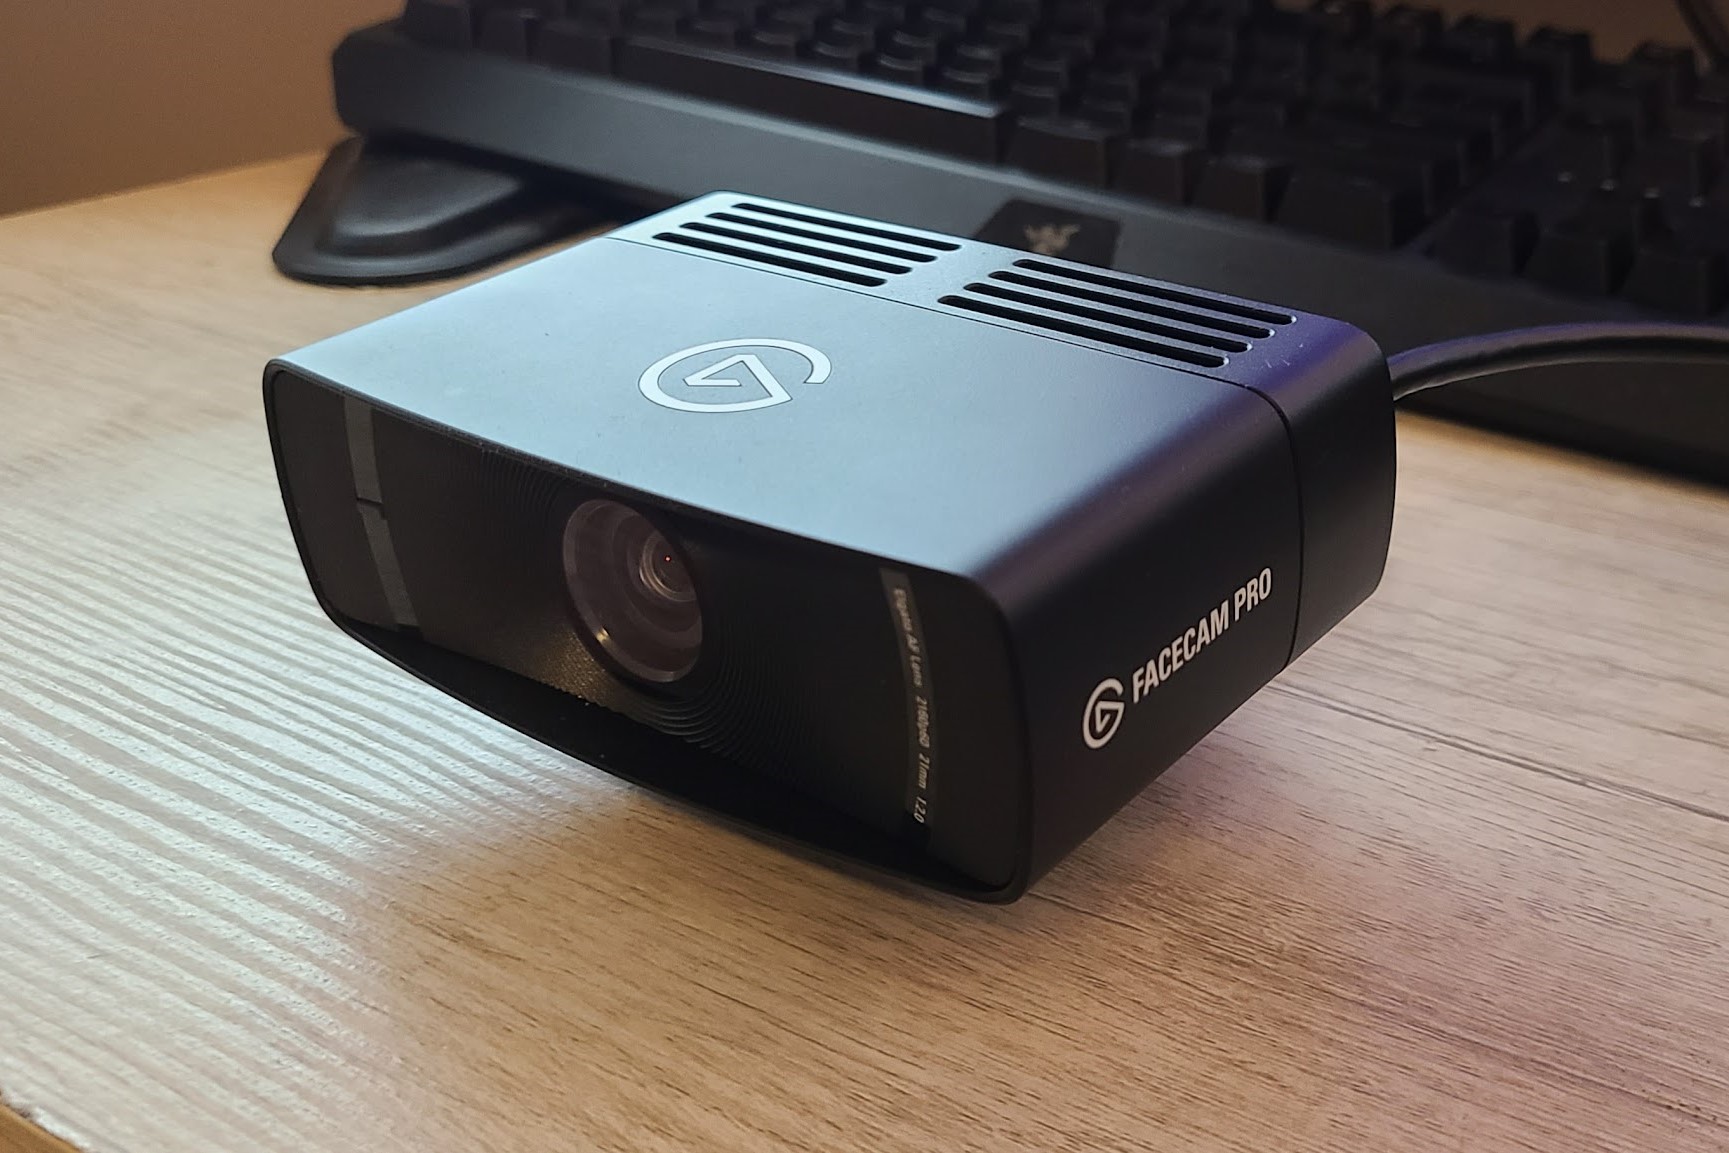 Elgato Facecam Pro review: unbeatable quality and smoothness